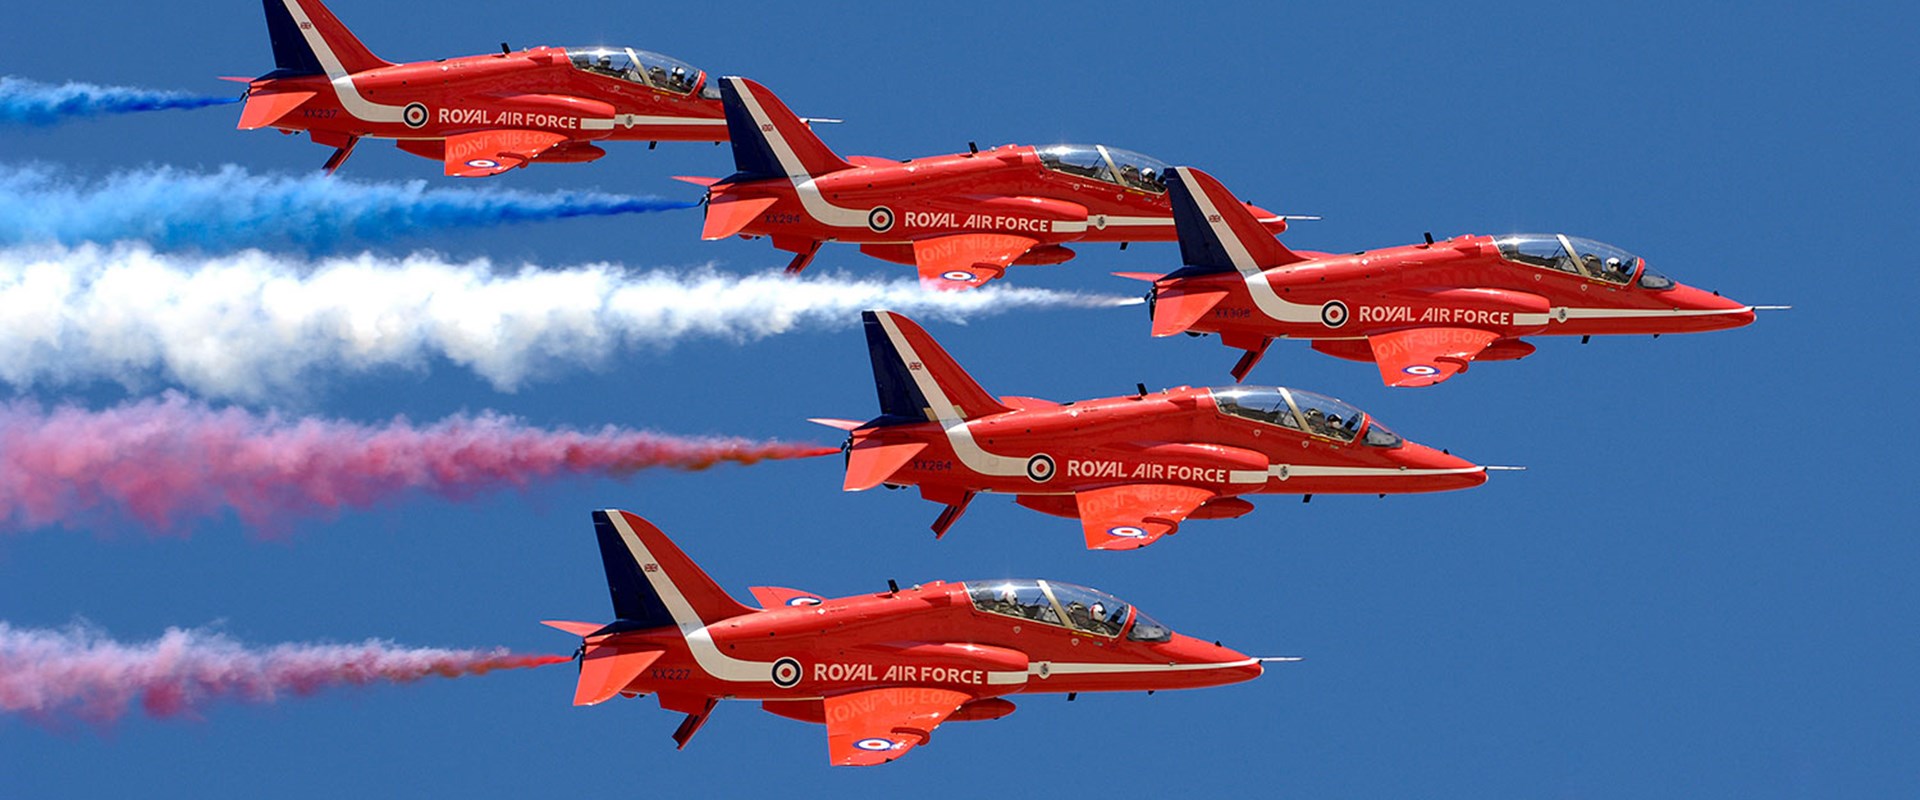 Ithaca James Dyson Sved Red Arrows Hawk